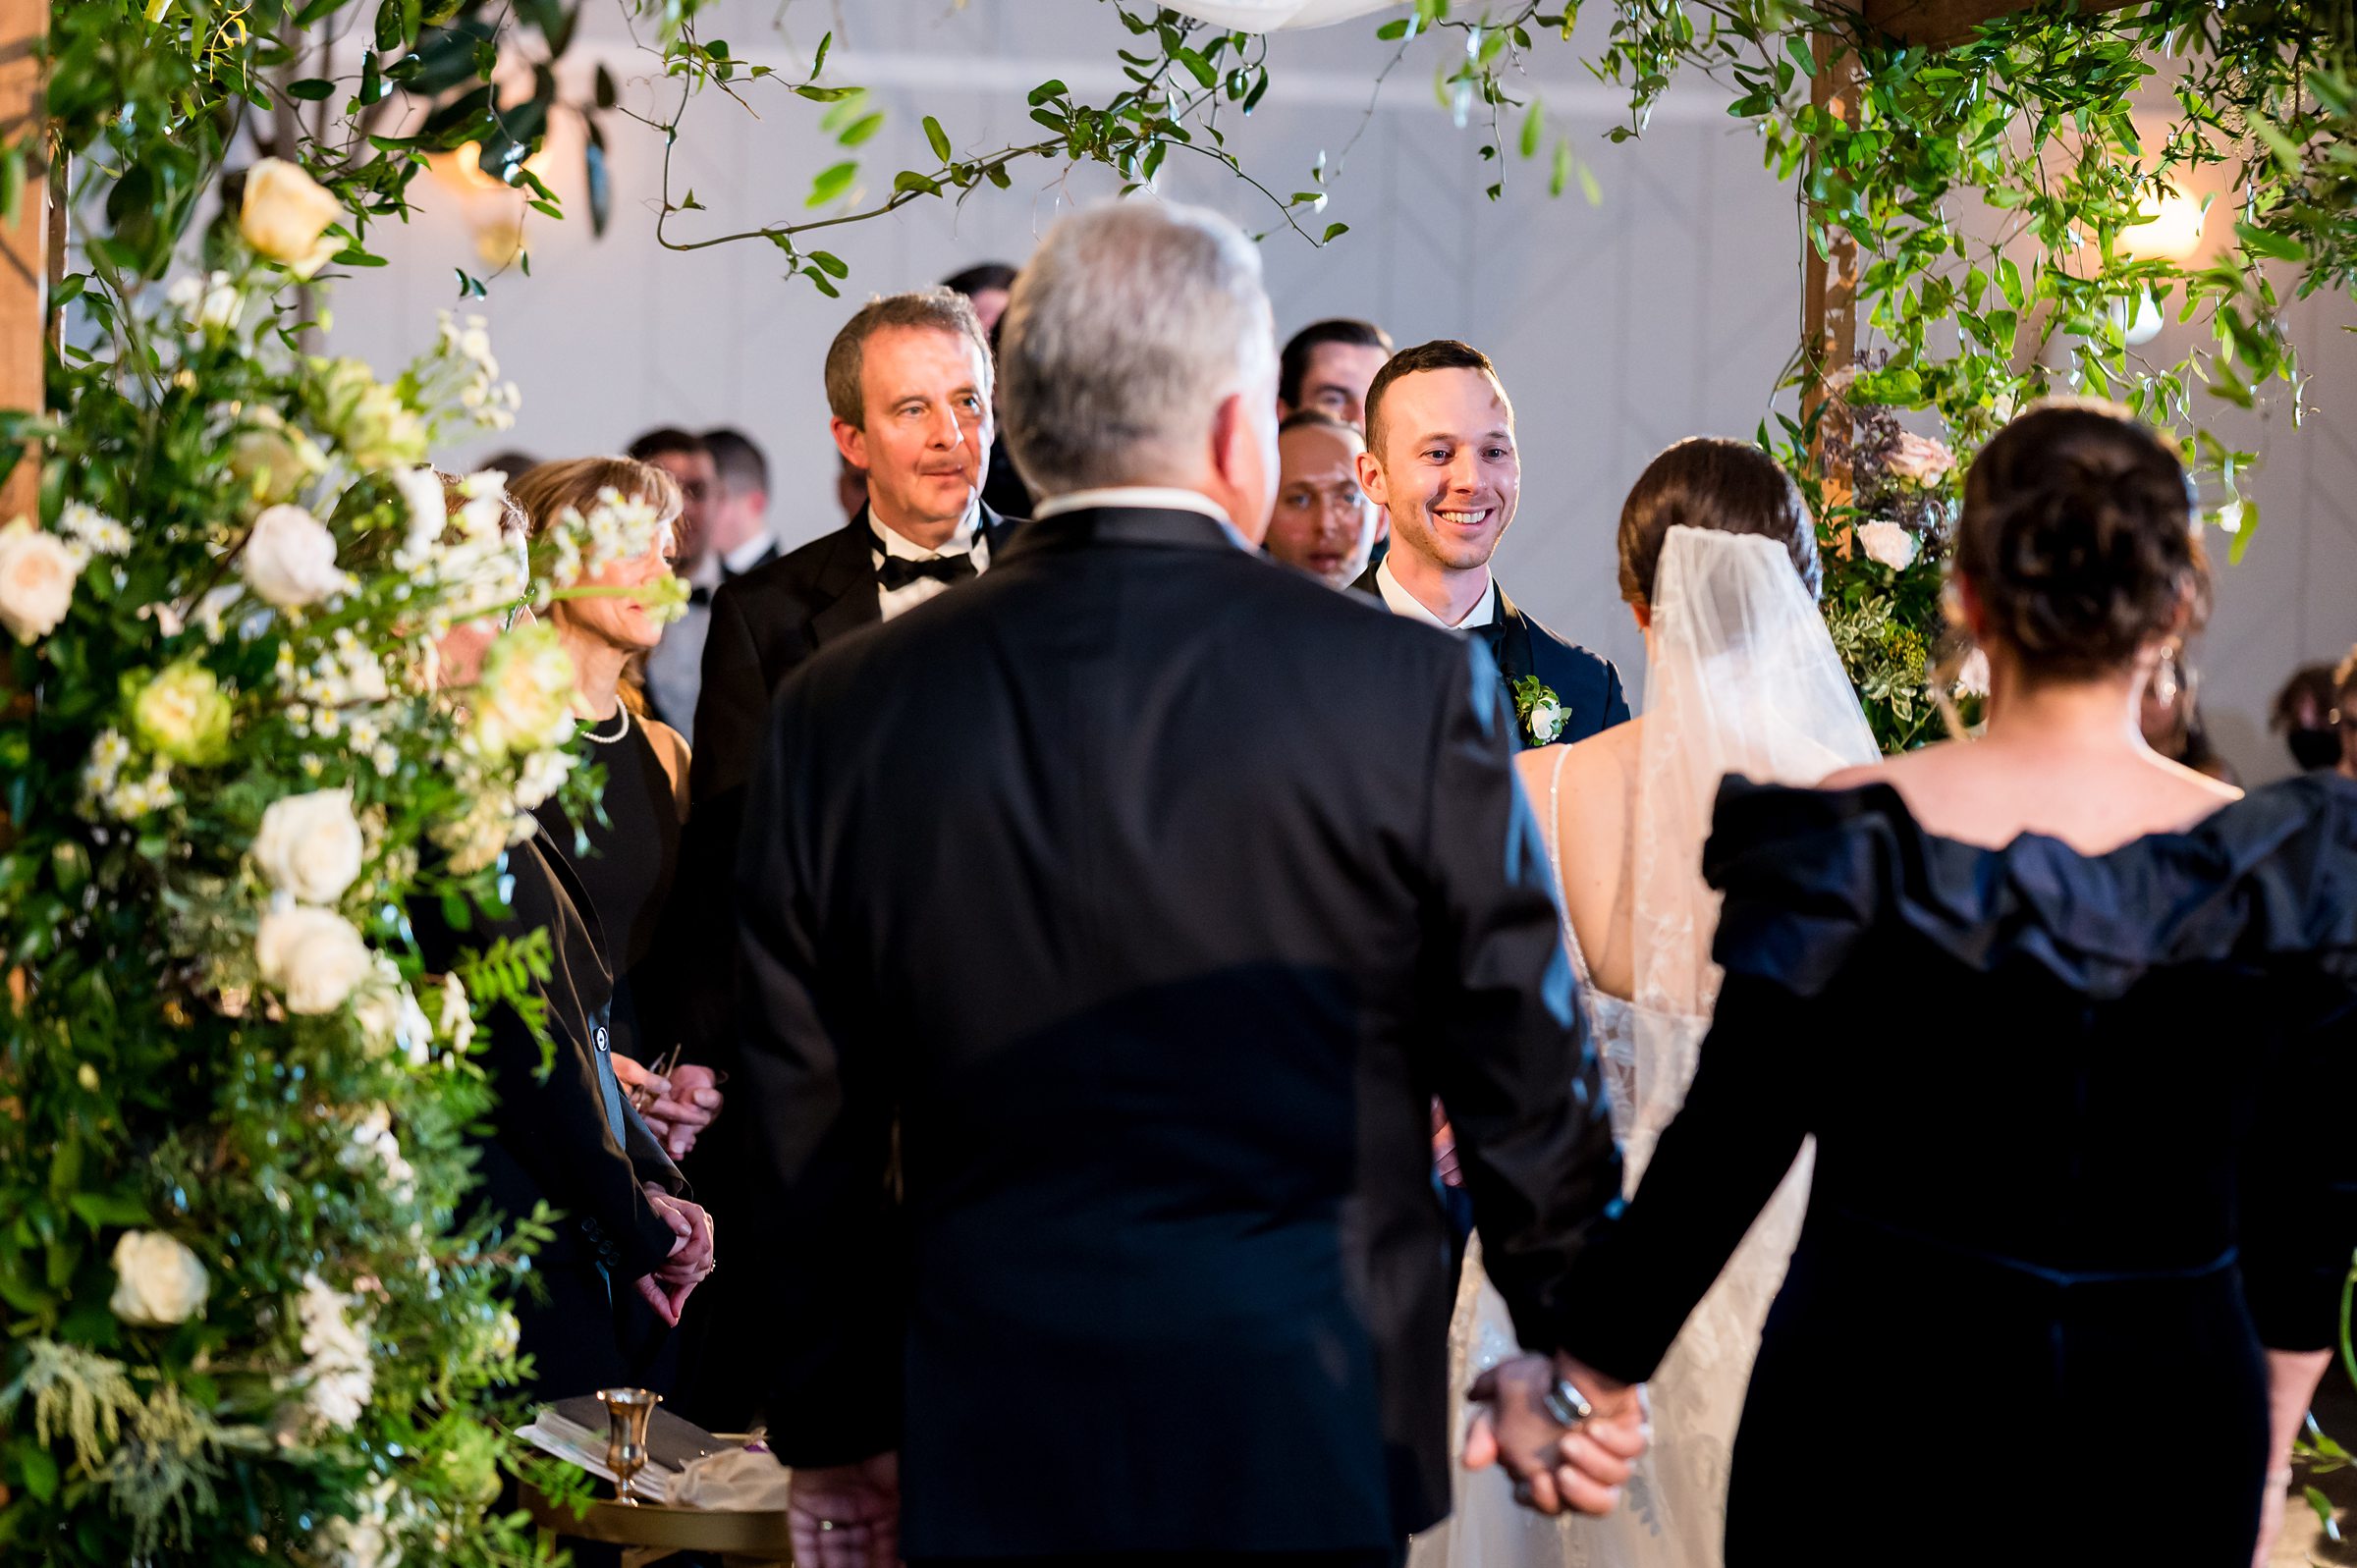 At a Lilah Events wedding, the bride and groom stroll down the aisle.